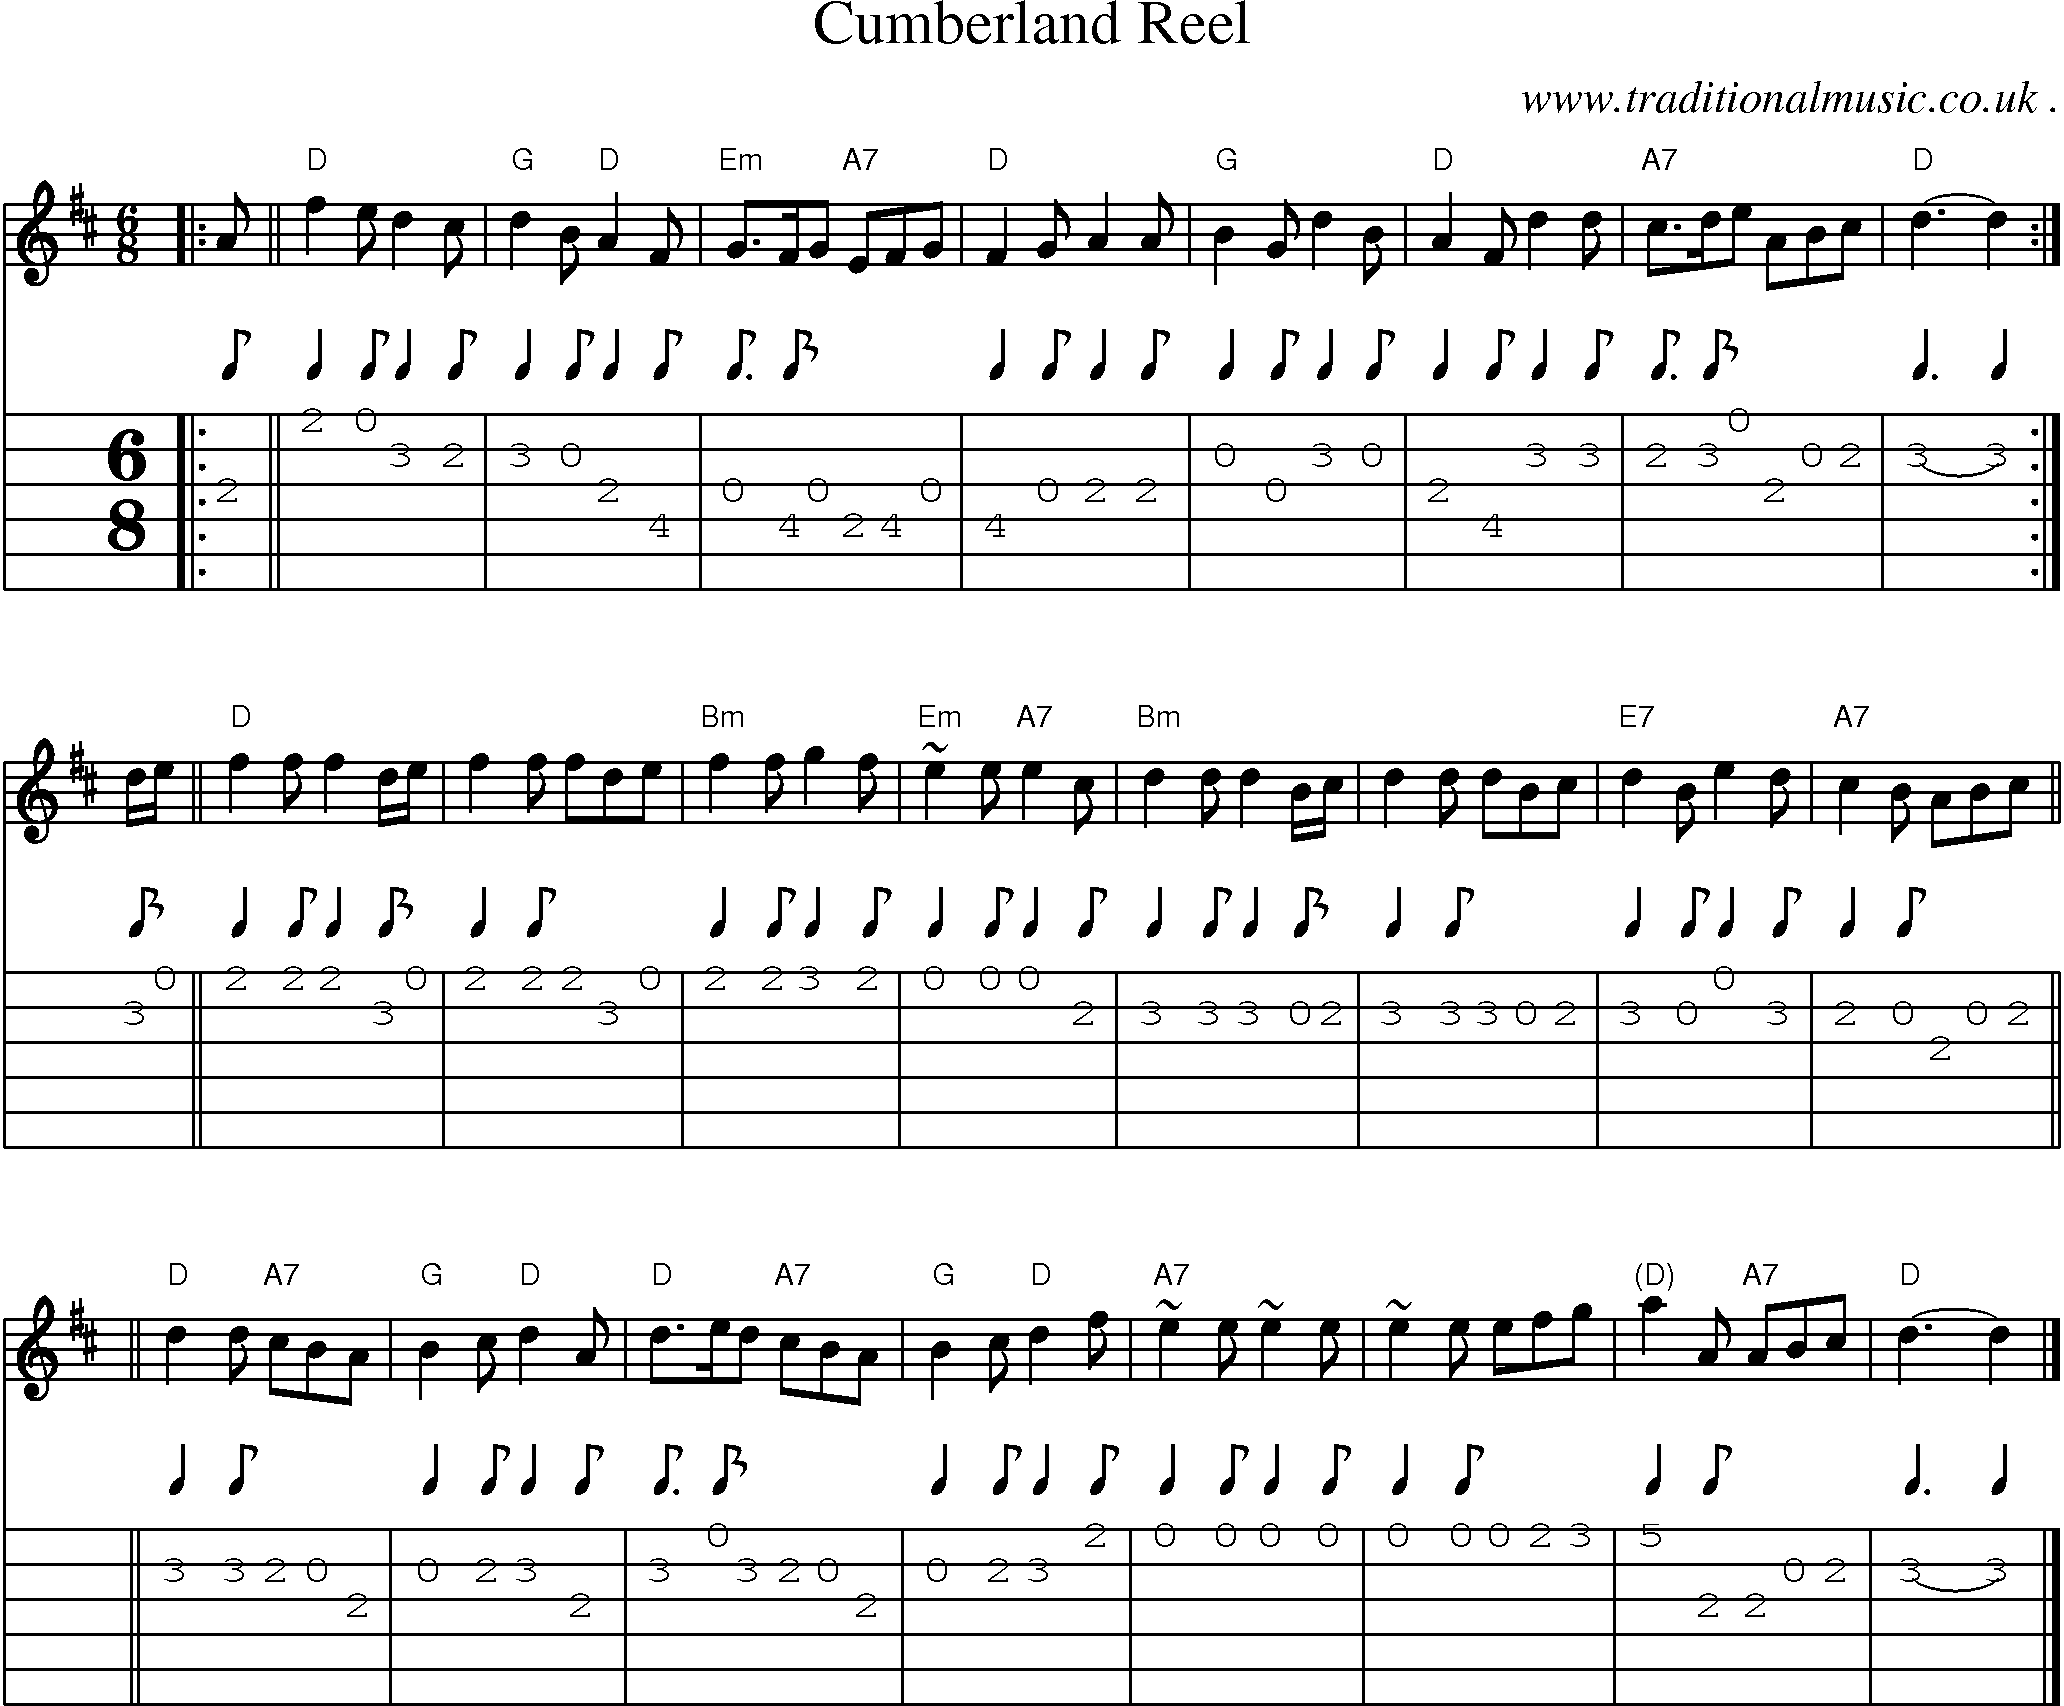 Sheet-music  score, Chords and Guitar Tabs for Cumberland Reel